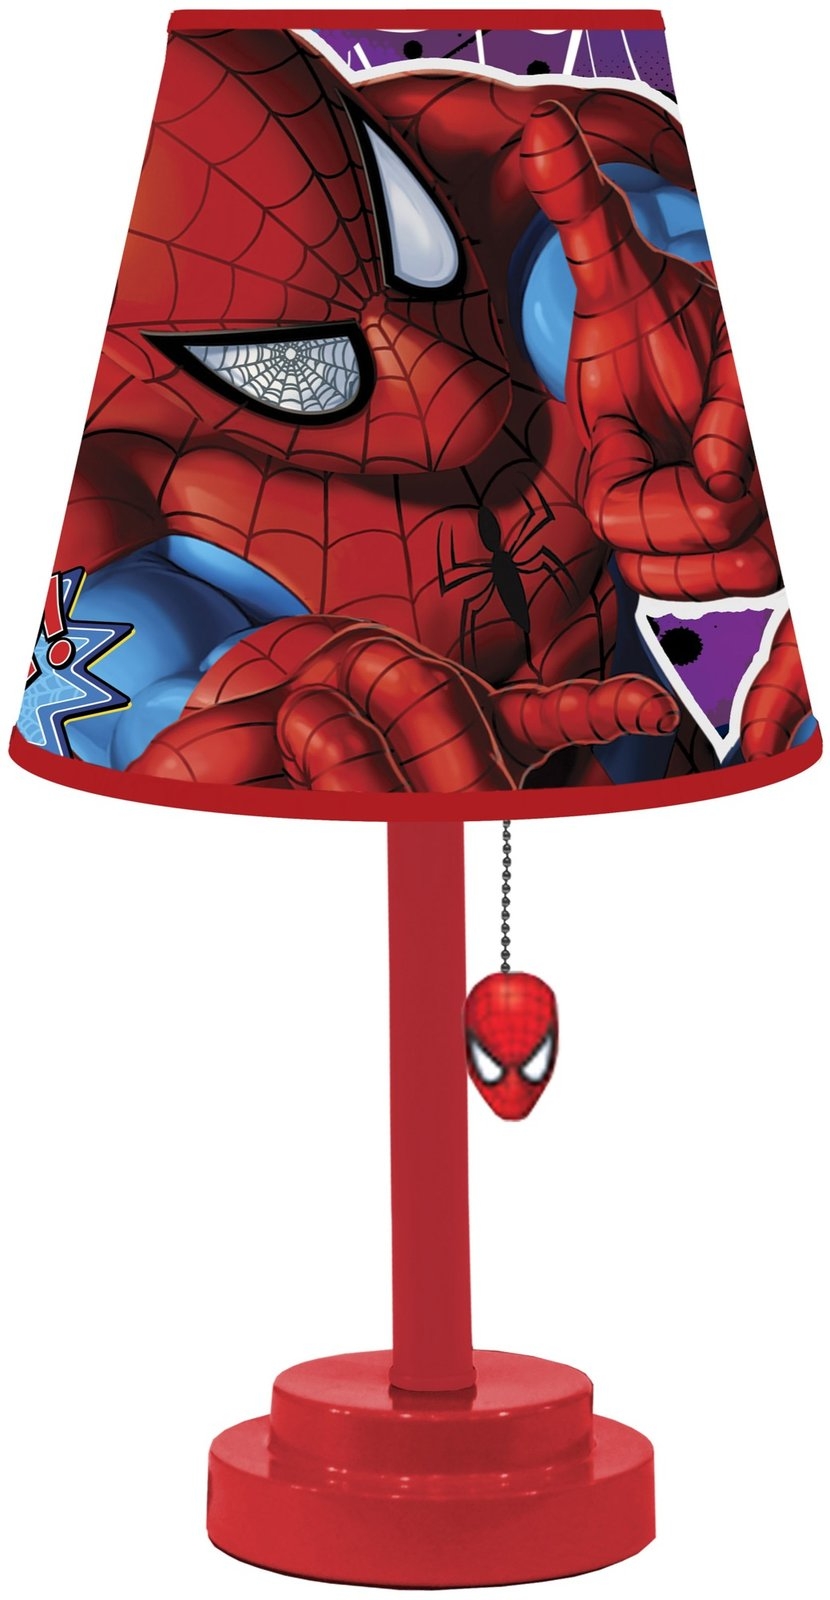 Spider man table lamp 2